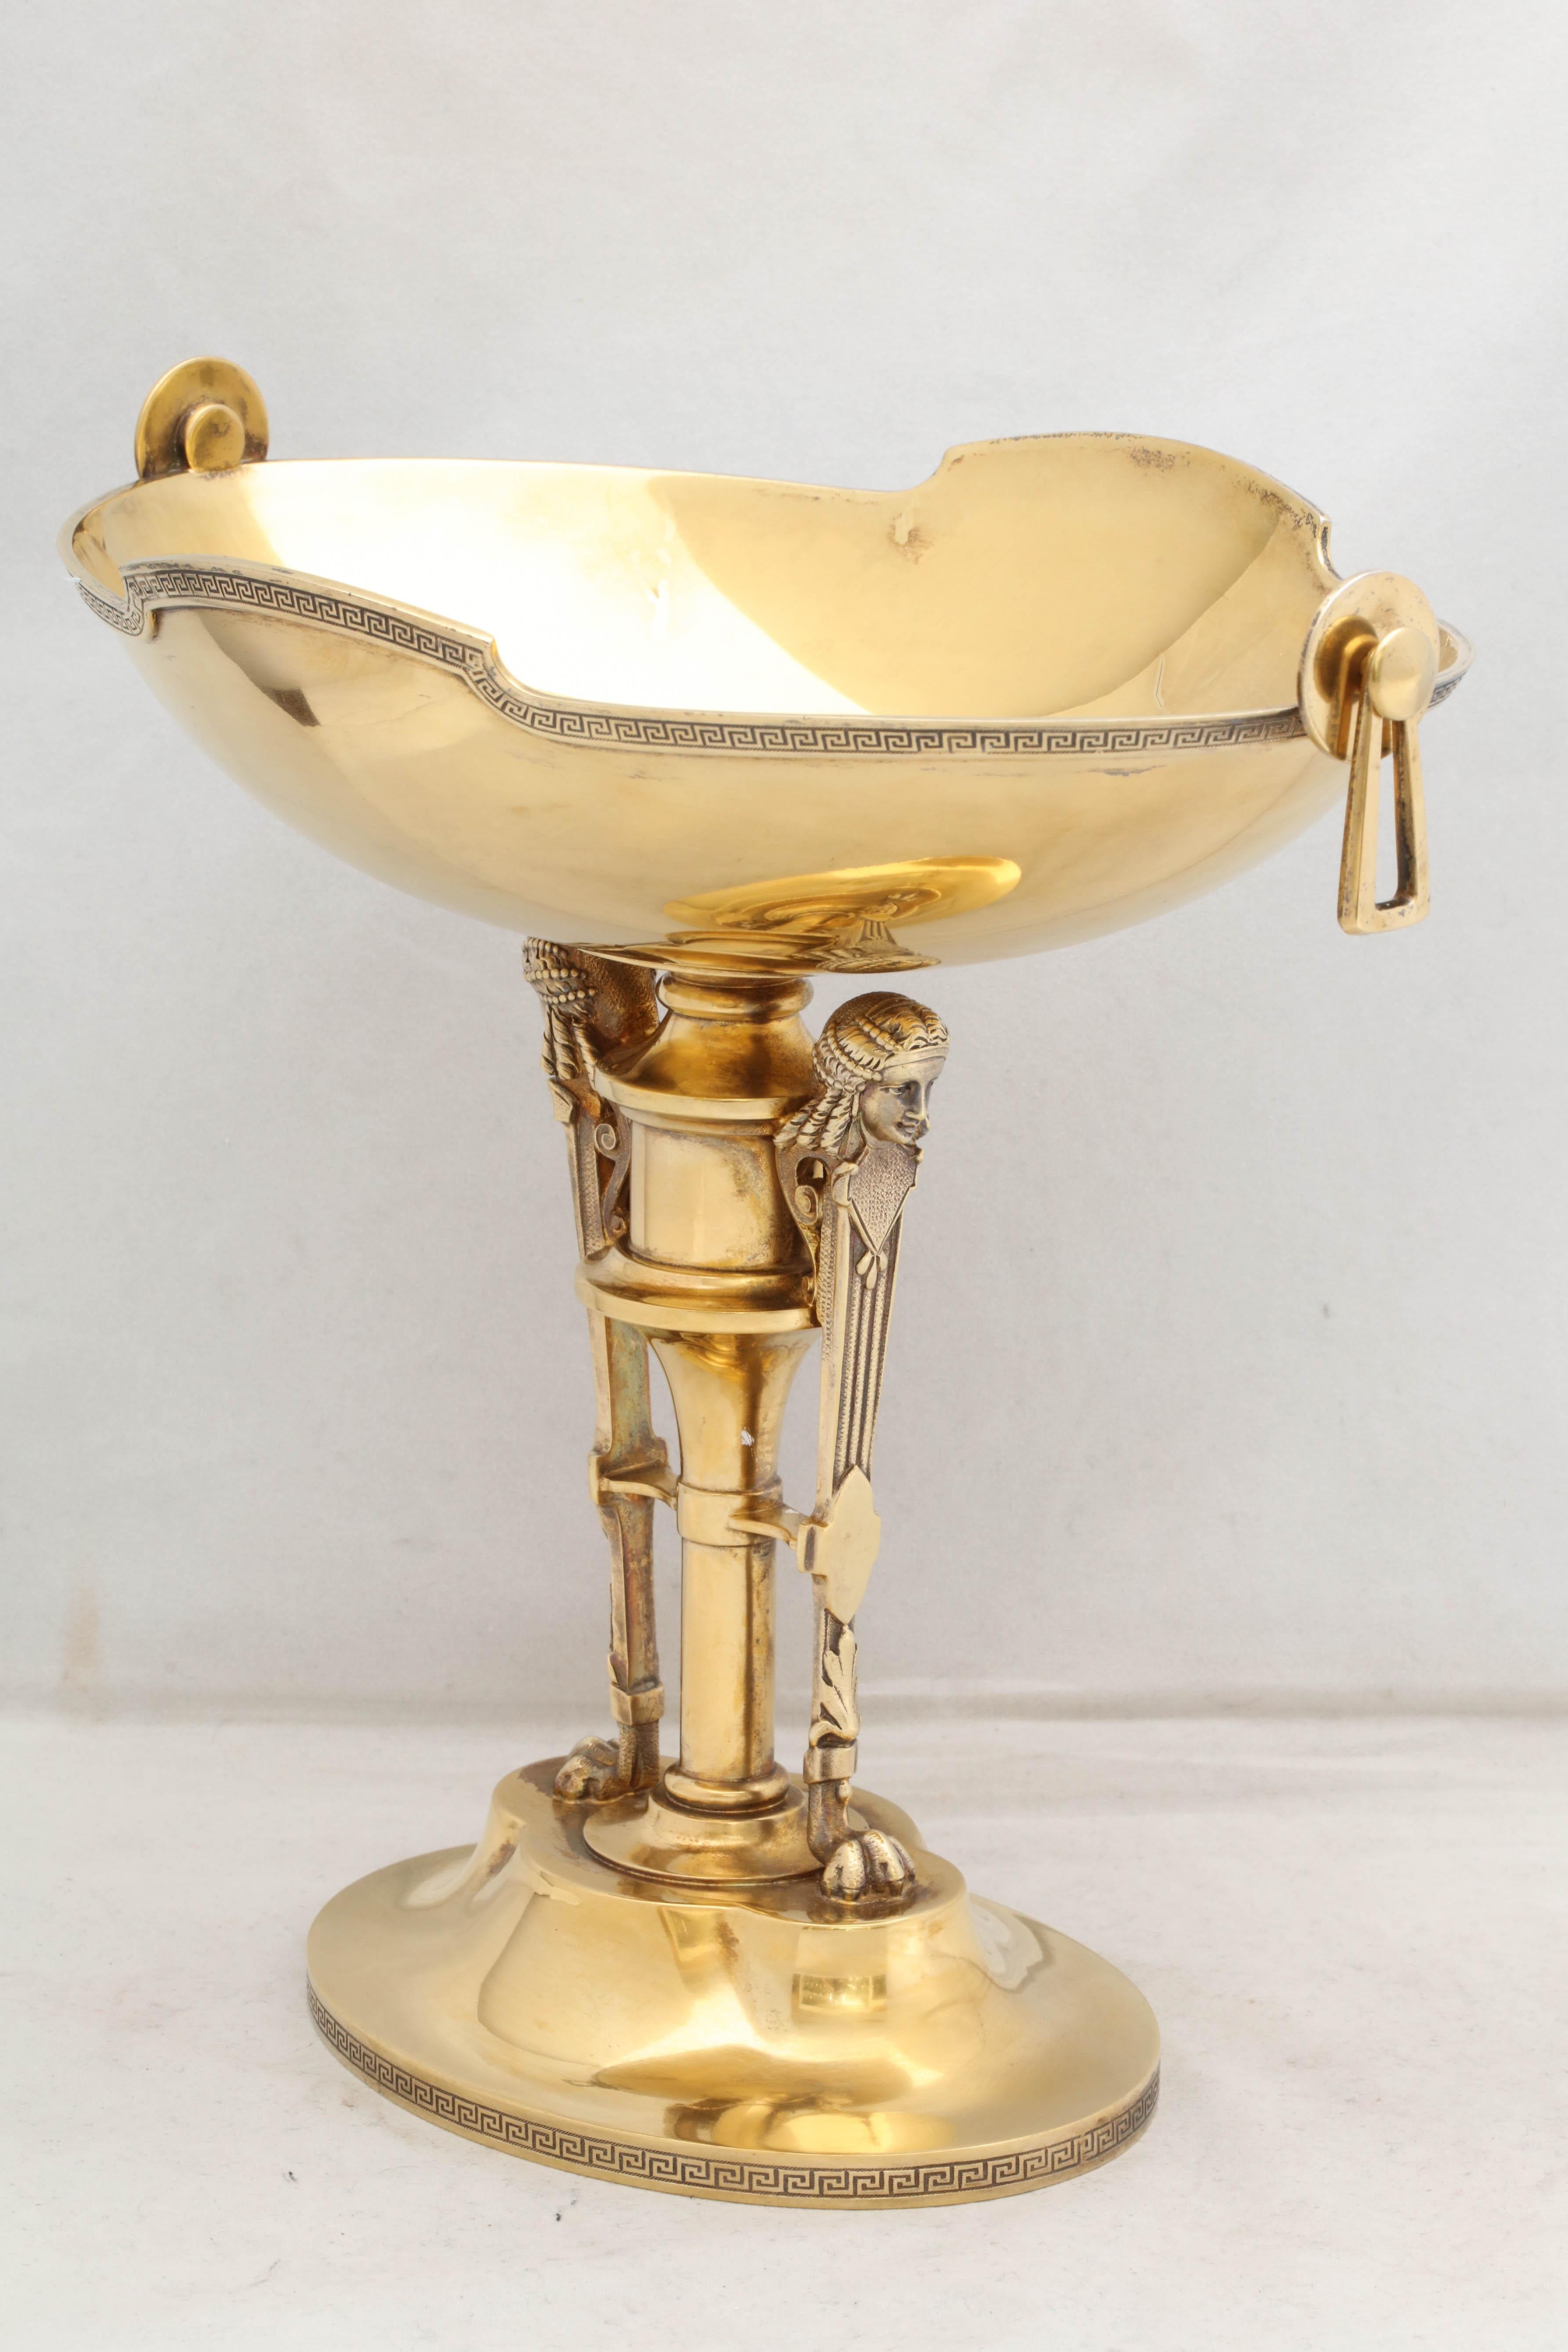 Neoclassical Sterling Silver Gilt Centrepiece by Gorham For Sale 6